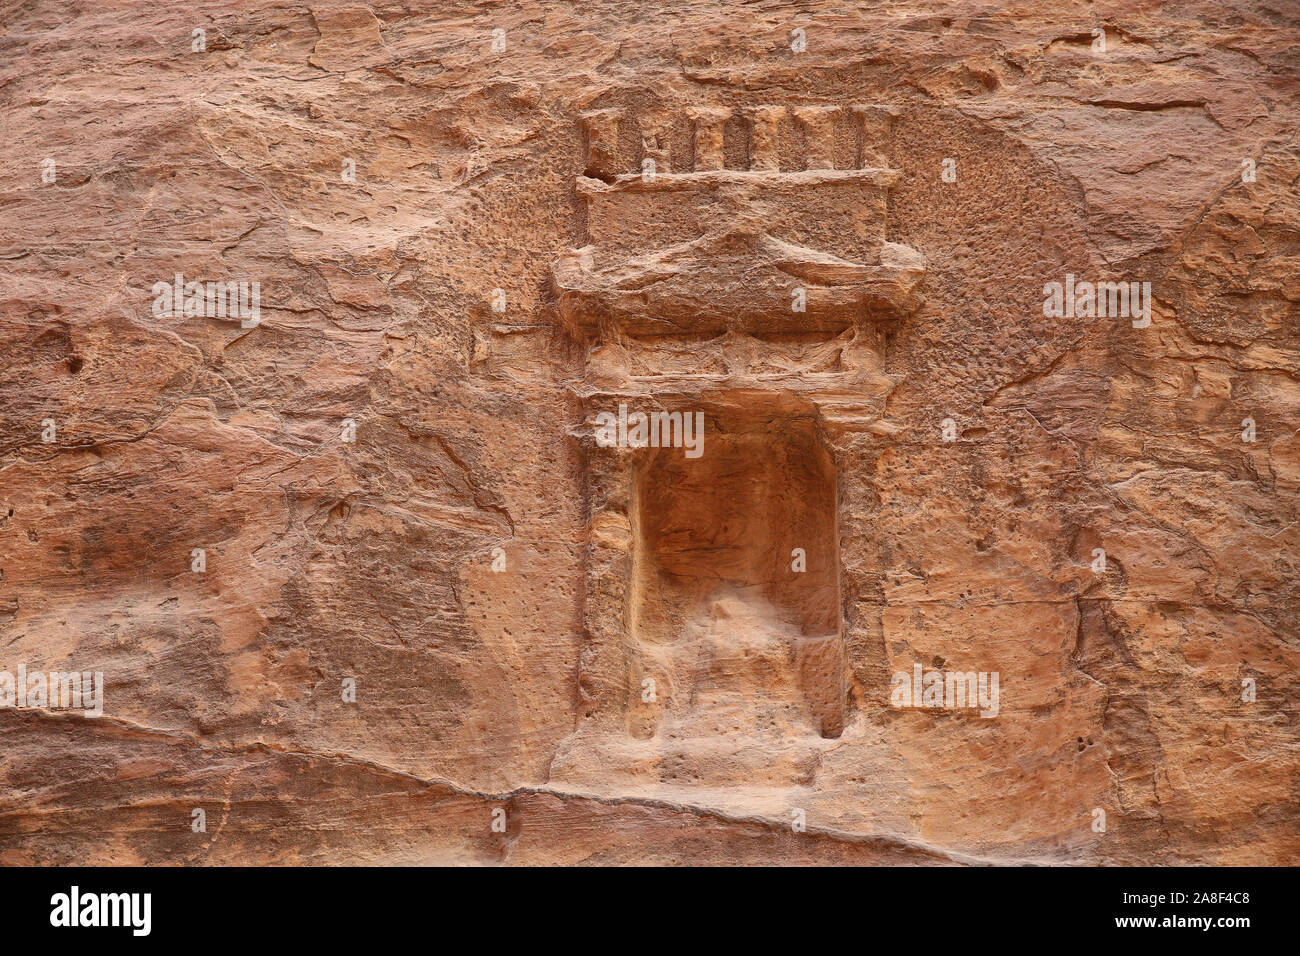 Carving in the sandstone cliffs of a window or entrance, Petra, Jordan. Stock Photo